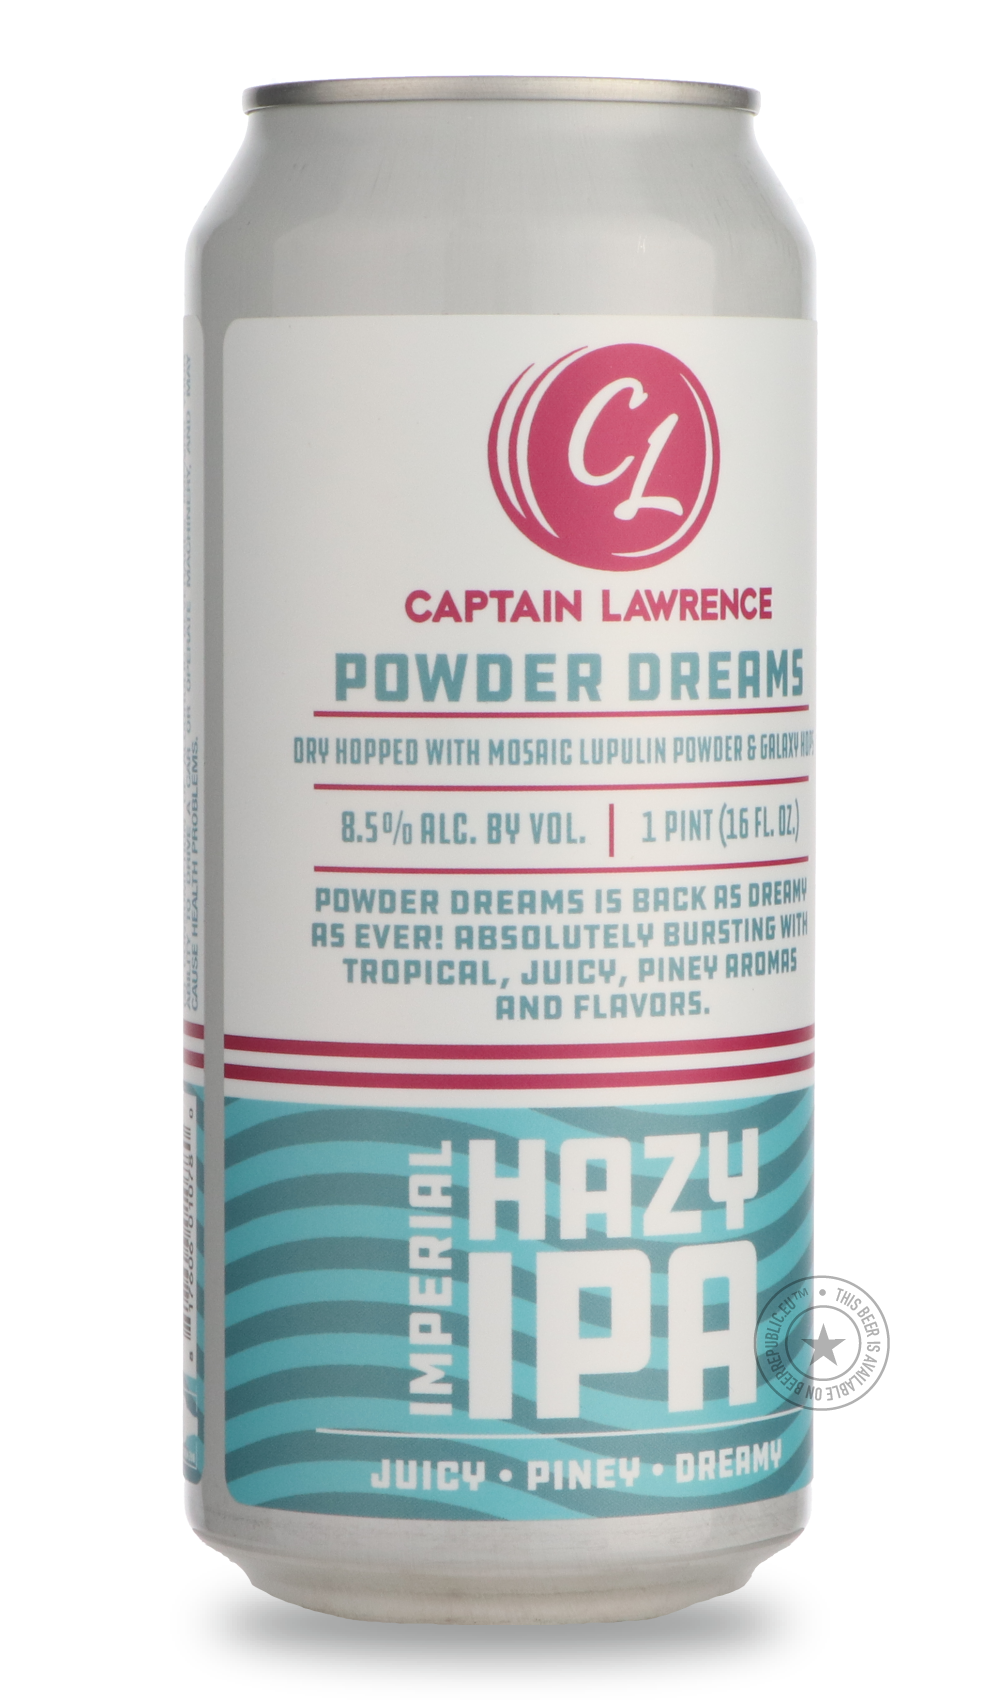 -Captain Lawrence- Powder Dreams-IPA- Only @ Beer Republic - The best online beer store for American & Canadian craft beer - Buy beer online from the USA and Canada - Bier online kopen - Amerikaans bier kopen - Craft beer store - Craft beer kopen - Amerikanisch bier kaufen - Bier online kaufen - Acheter biere online - IPA - Stout - Porter - New England IPA - Hazy IPA - Imperial Stout - Barrel Aged - Barrel Aged Imperial Stout - Brown - Dark beer - Blond - Blonde - Pilsner - Lager - Wheat - Weizen - Amber - 